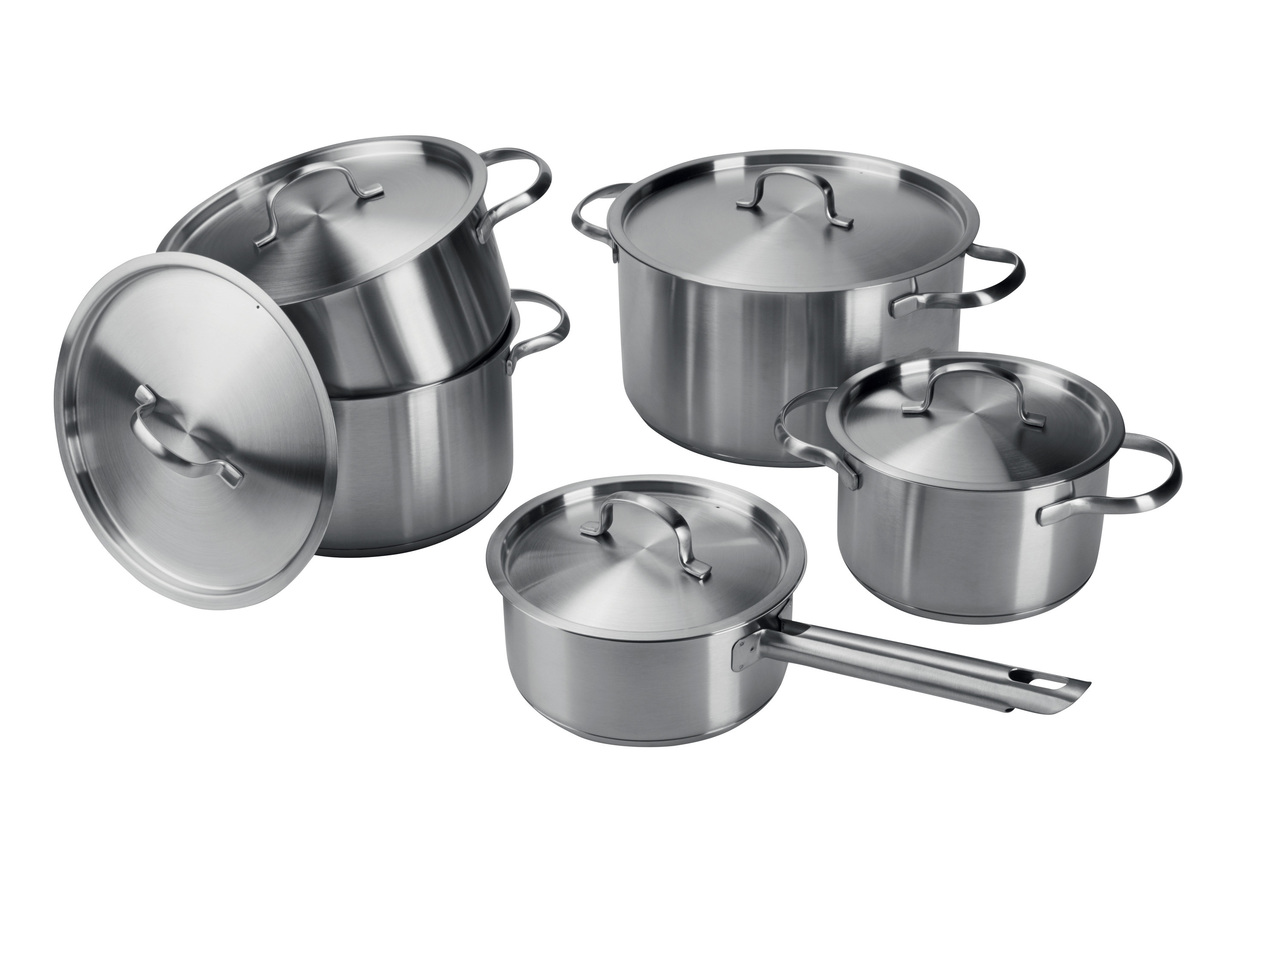 ERNESTO Stainless Steel Cookware Set